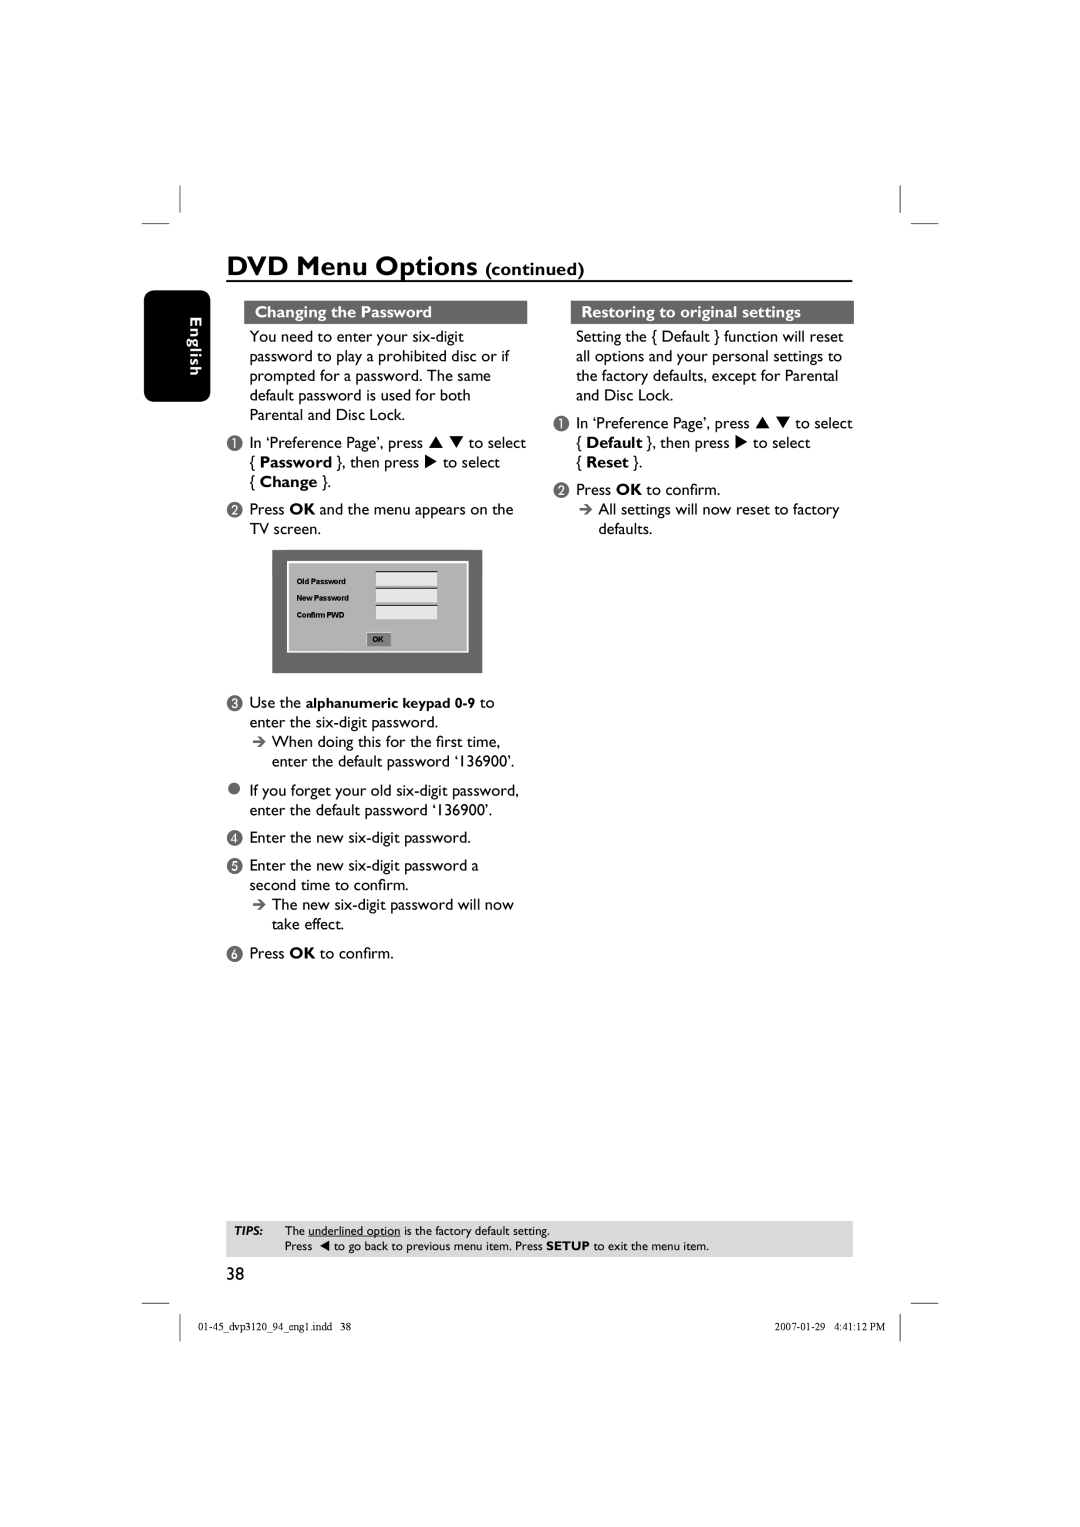 Philips DVP3721X/94 Changing the Password, Change, Restoring to original settings, Reset, DVD Menu Options continued 